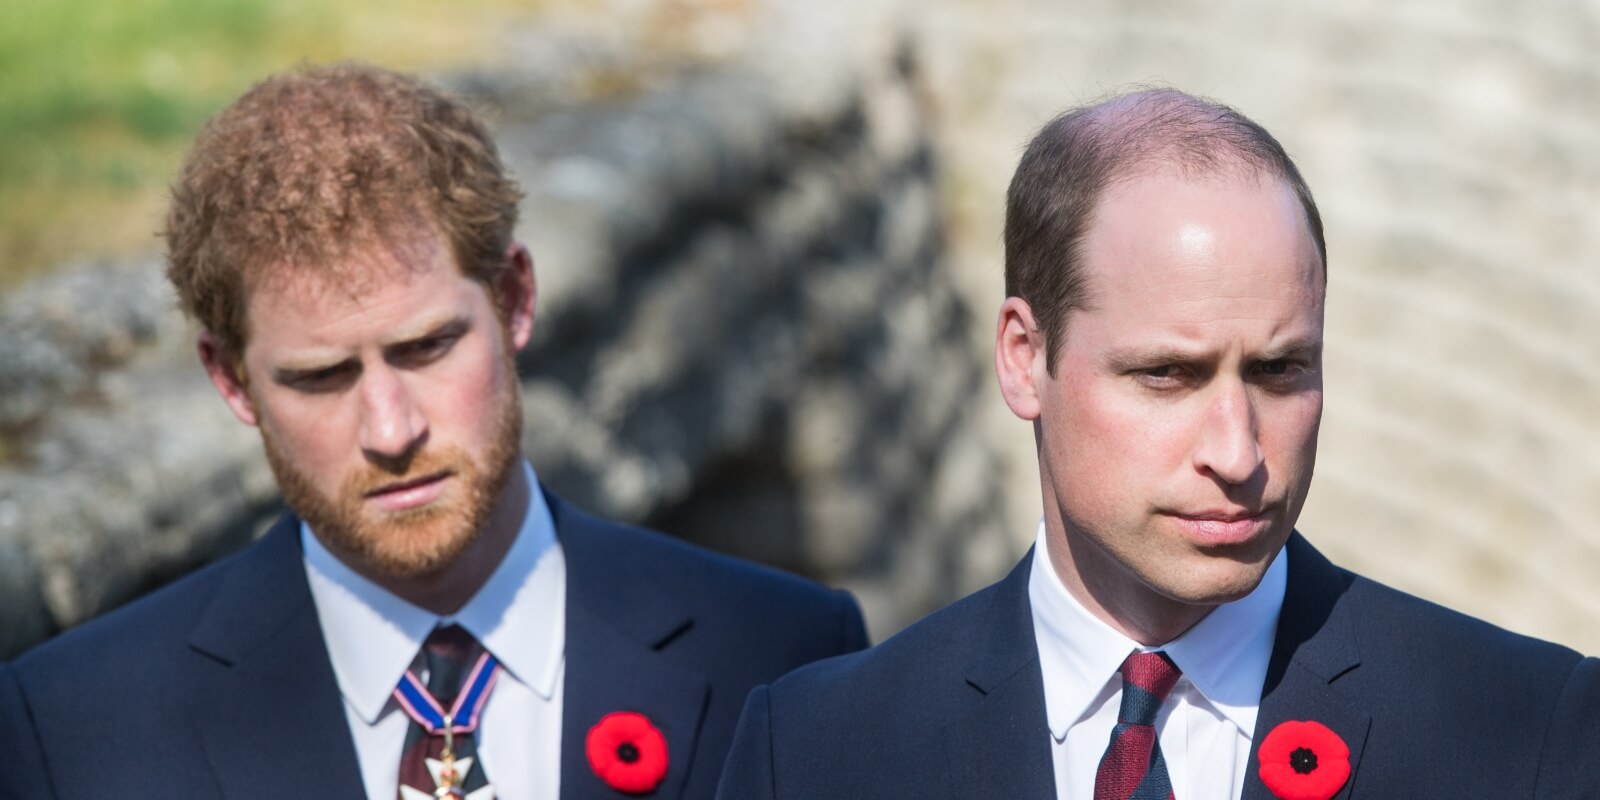 Prince Harry and Prince William commemorate the 100th anniversary of the battle of Vimy Ridge on April 9, 2017 in Lille, France.